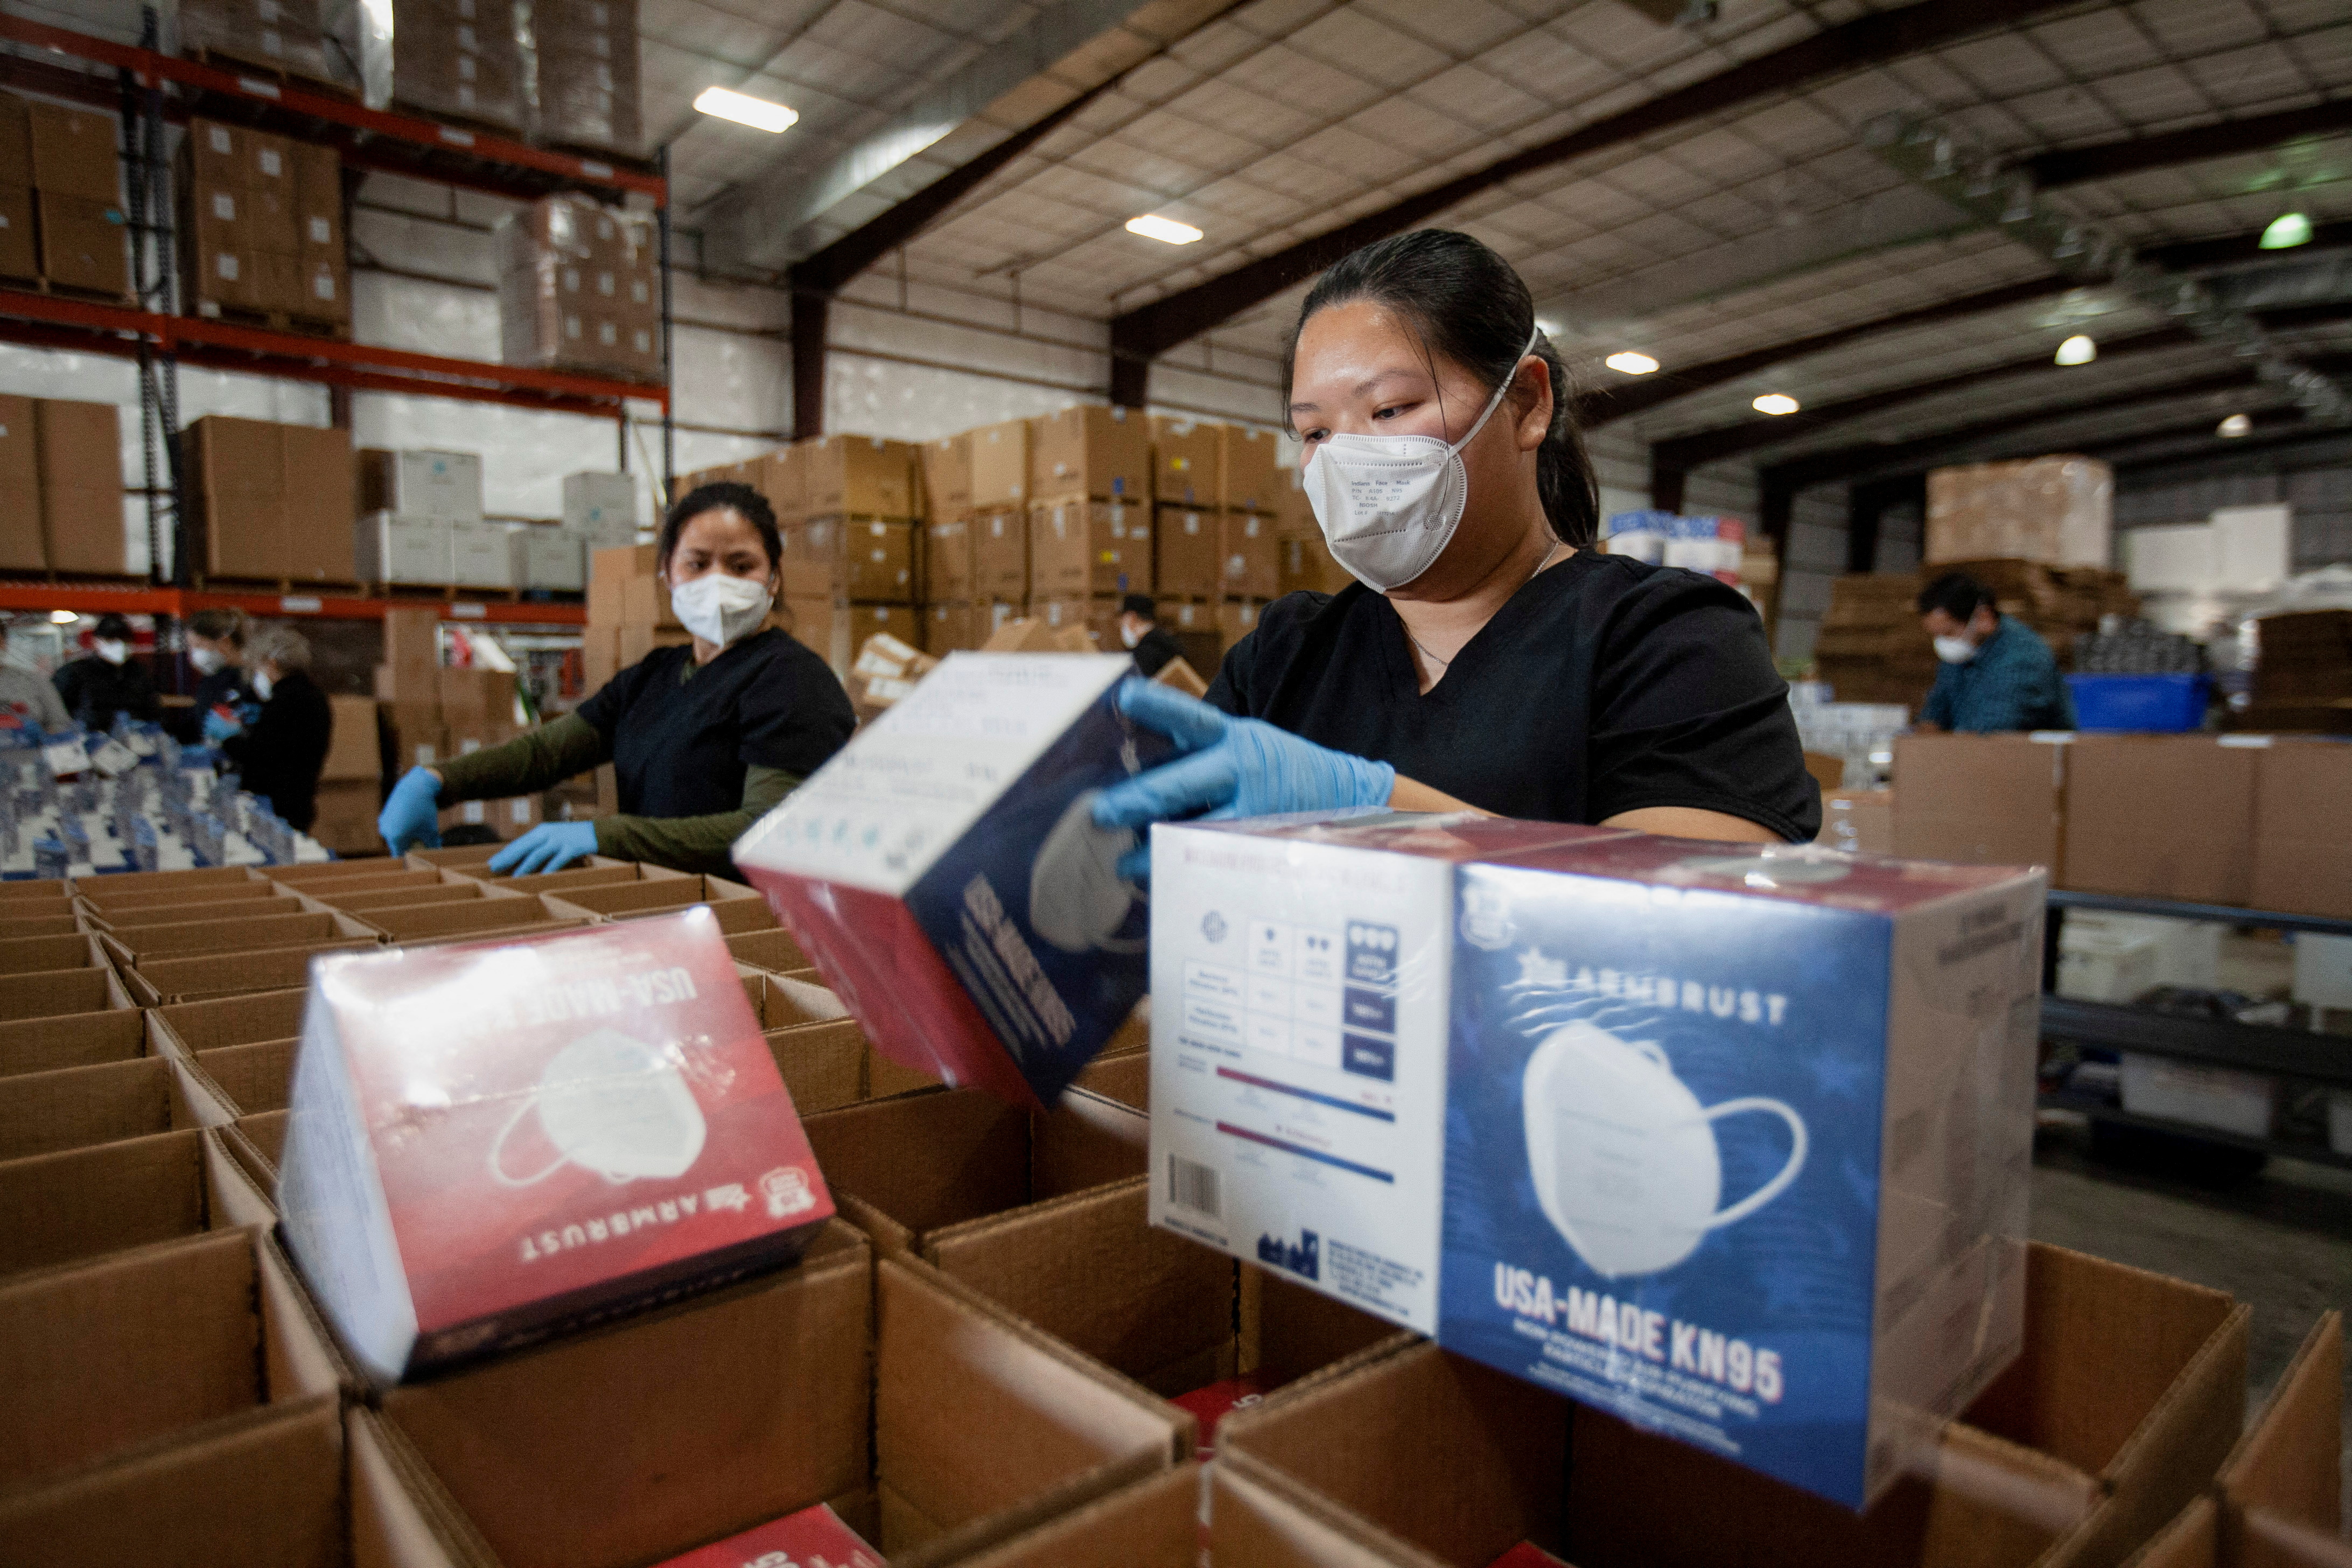 Sue Nguyen, an operator for Armbrust American, packs masks at the company's warehouse in Pflugerville, Texas, U.S., January 12, 2022. REUTERS/Nuri Vallbona